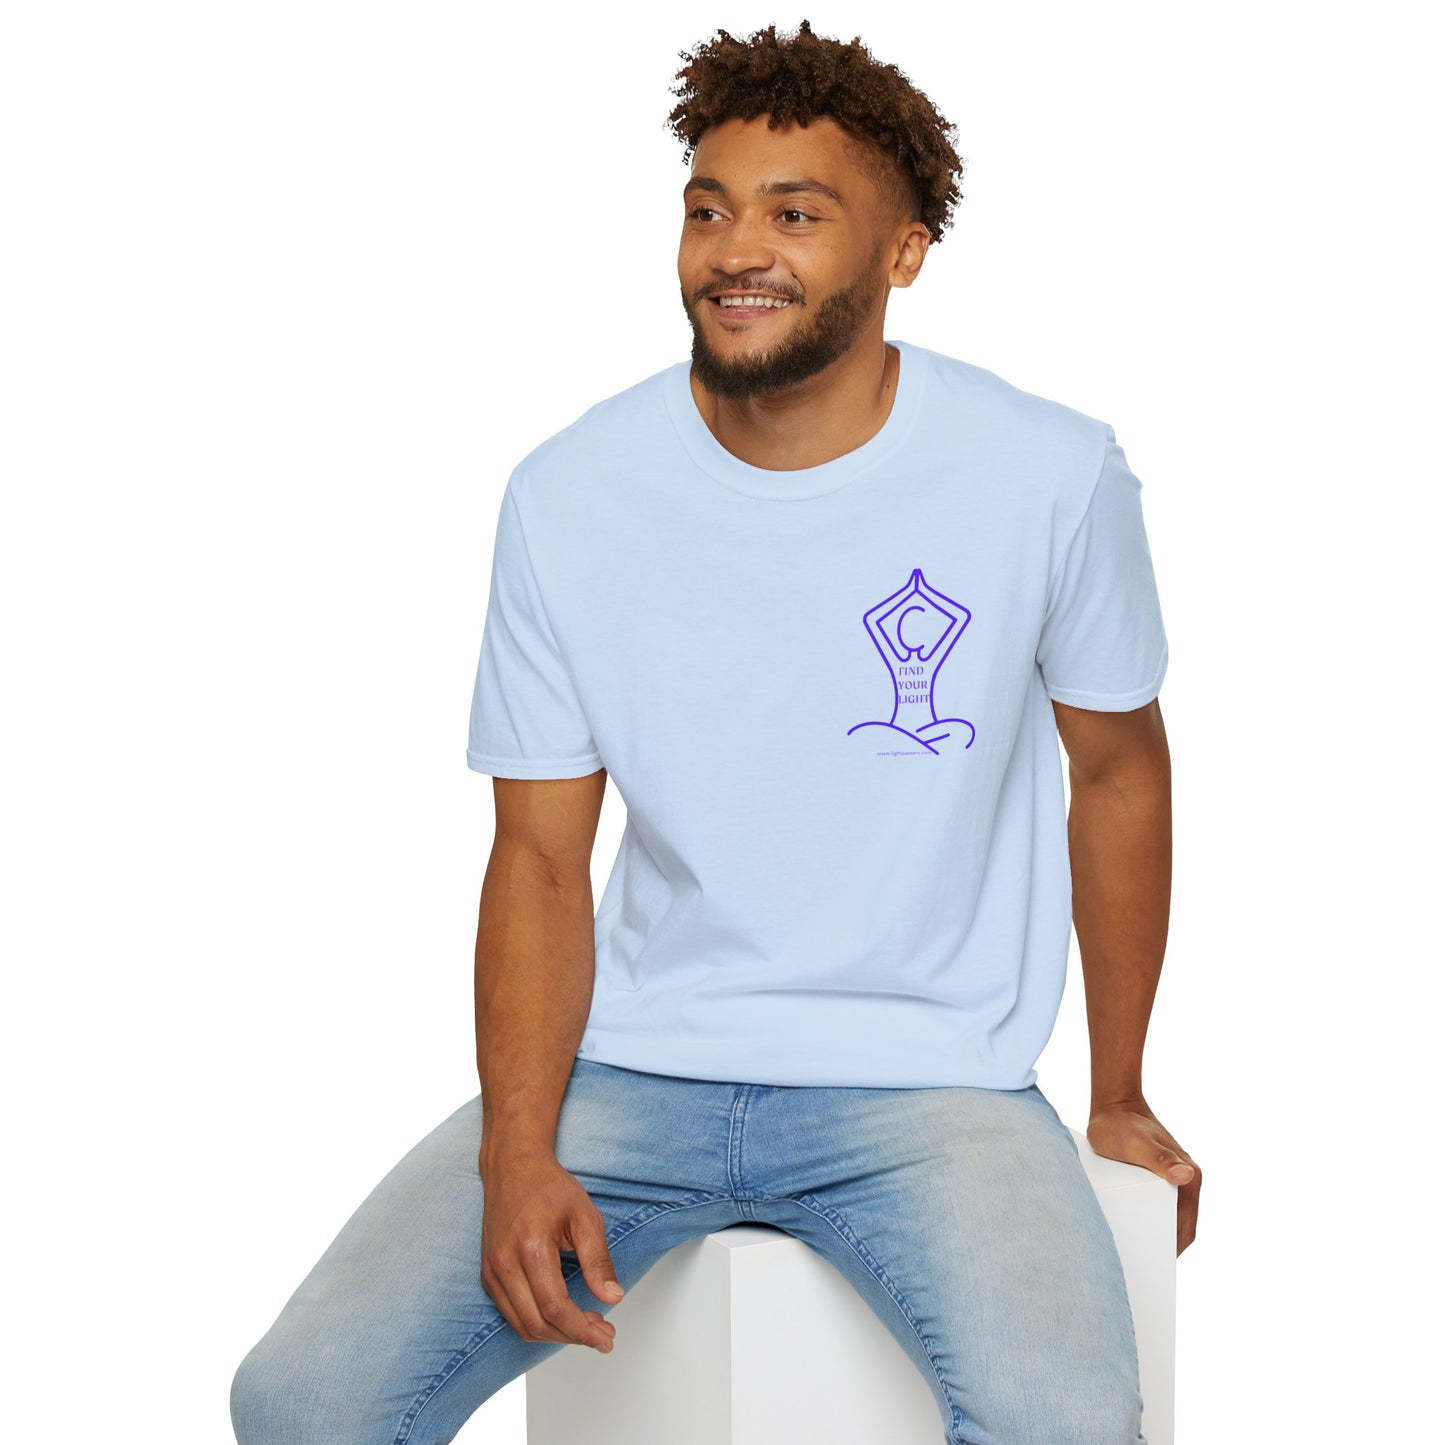 Light Passers Marketplace Yoga Find Your Light Unisex Soft T-Shirt Simple Messages, Fitness, Mental Health